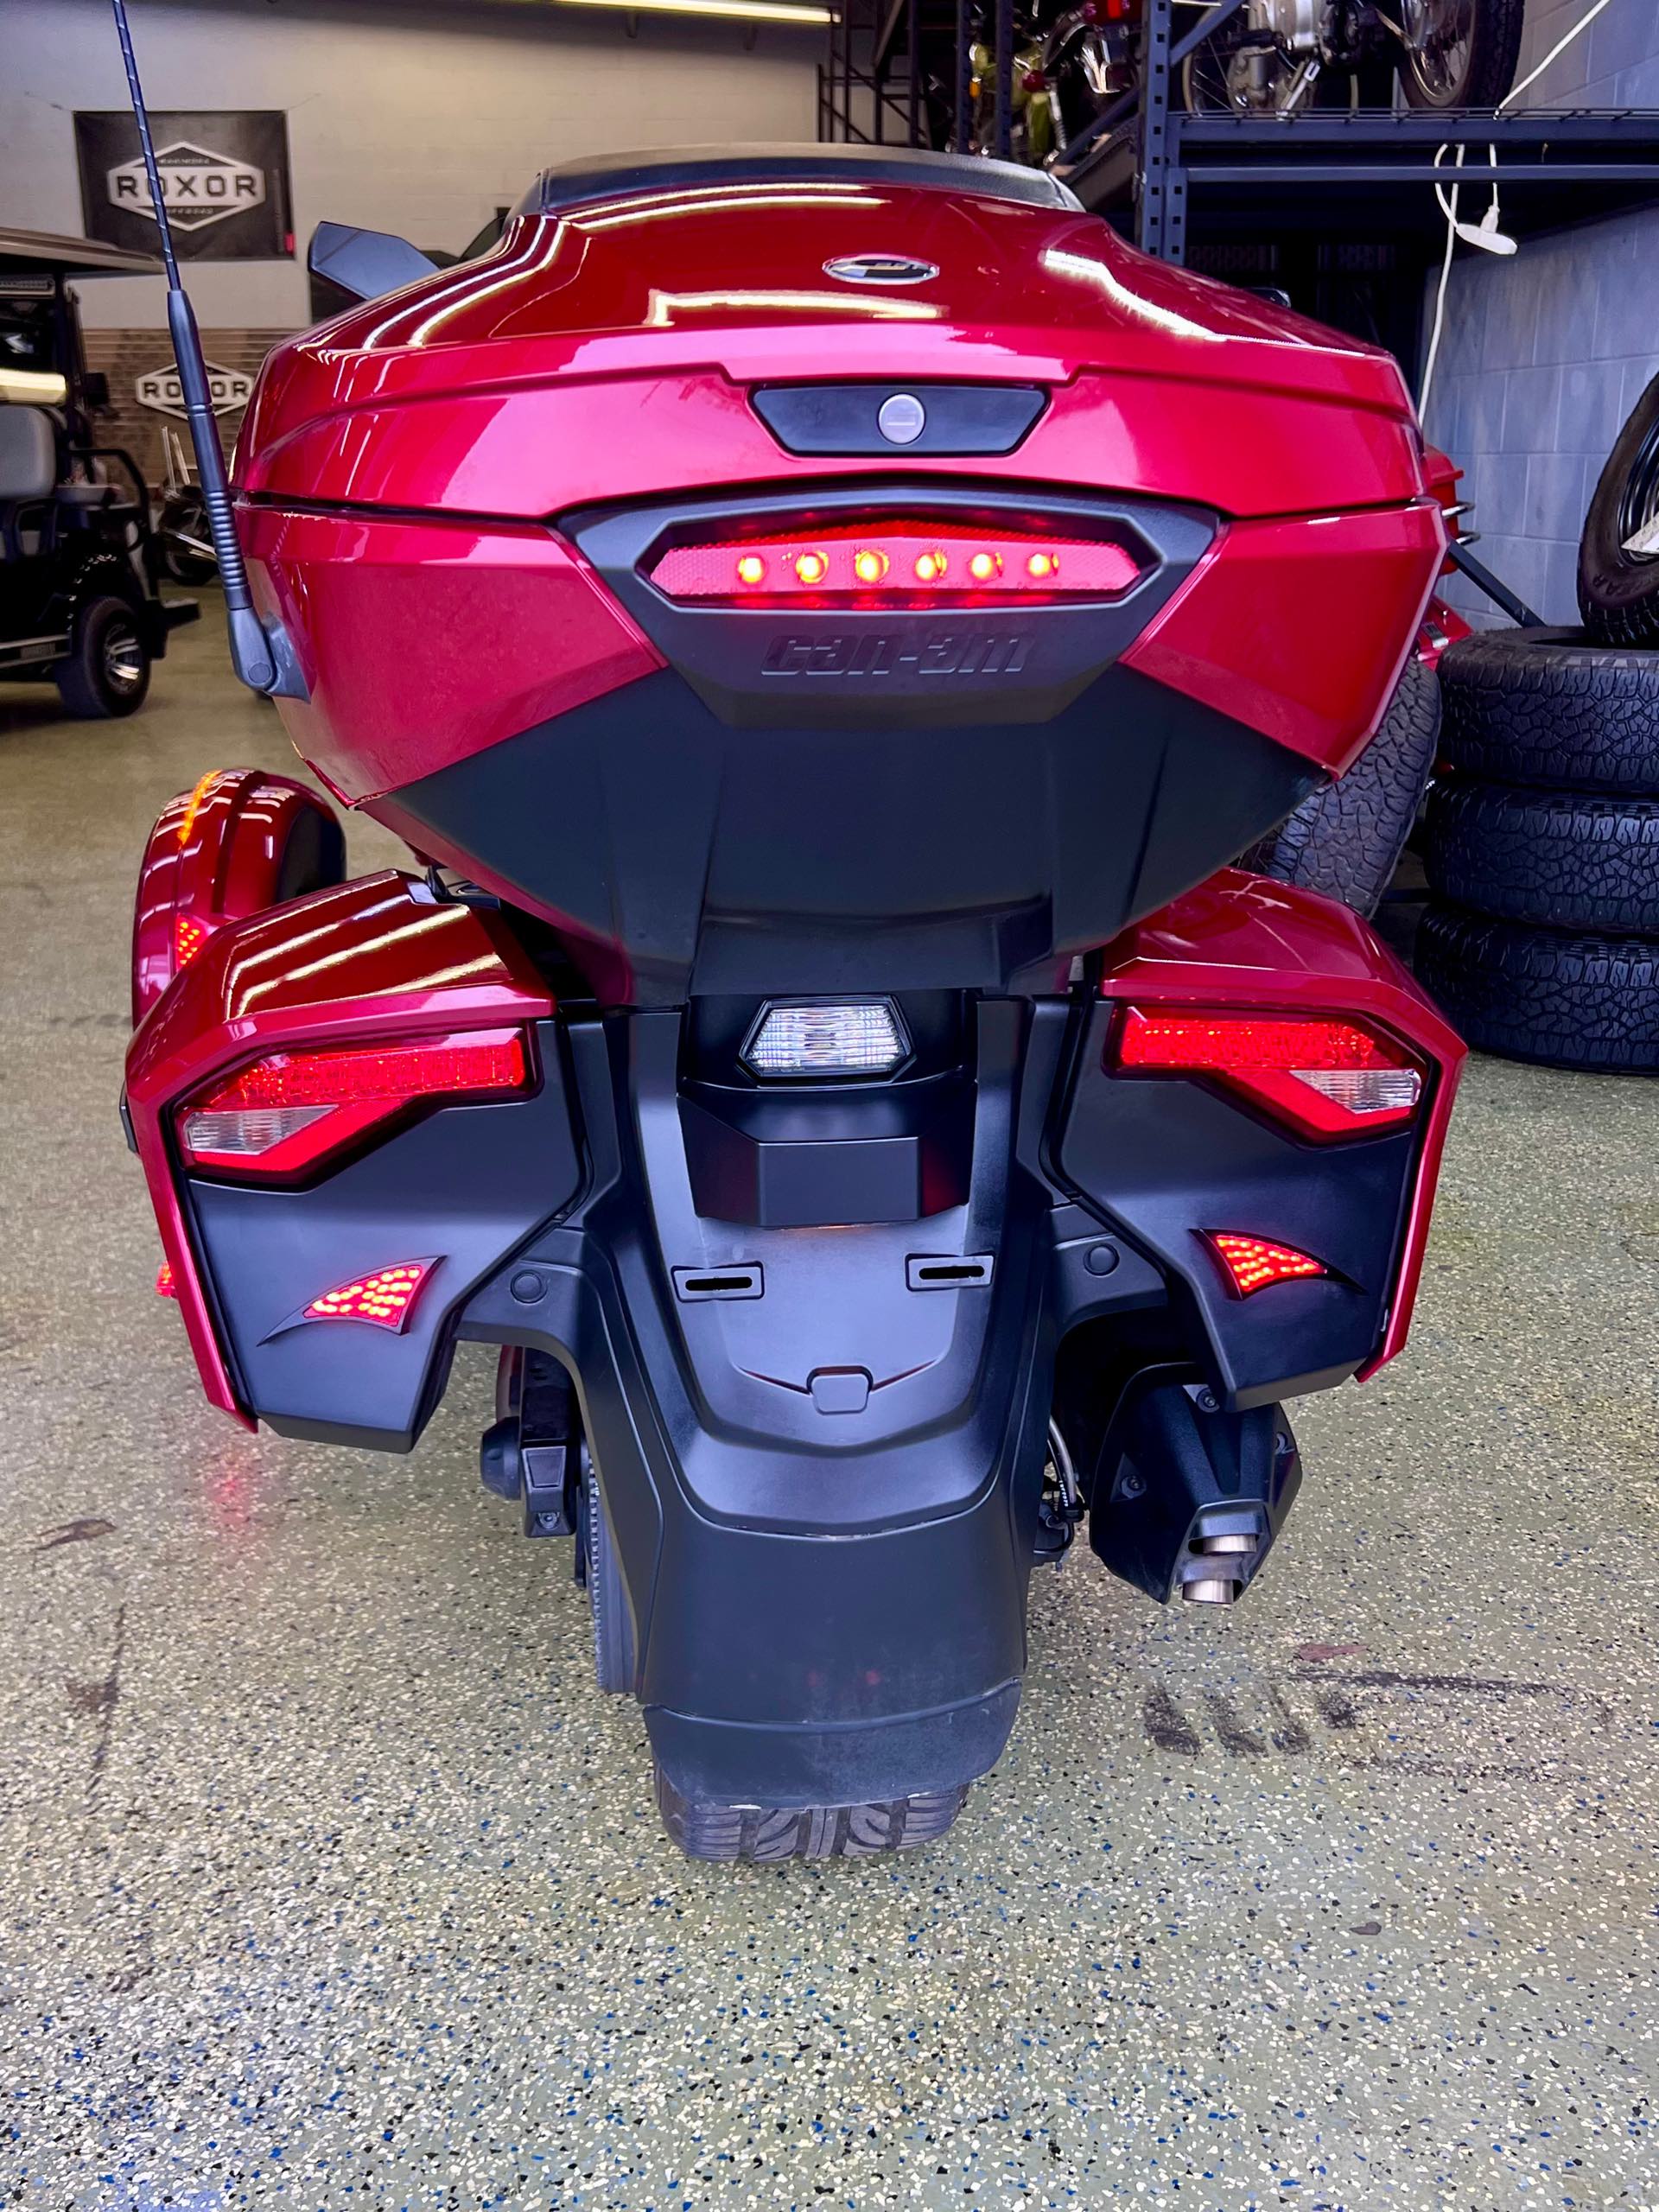 2018 Can-Am Spyder F3 Limited at Thornton's Motorcycle Sales, Madison, IN